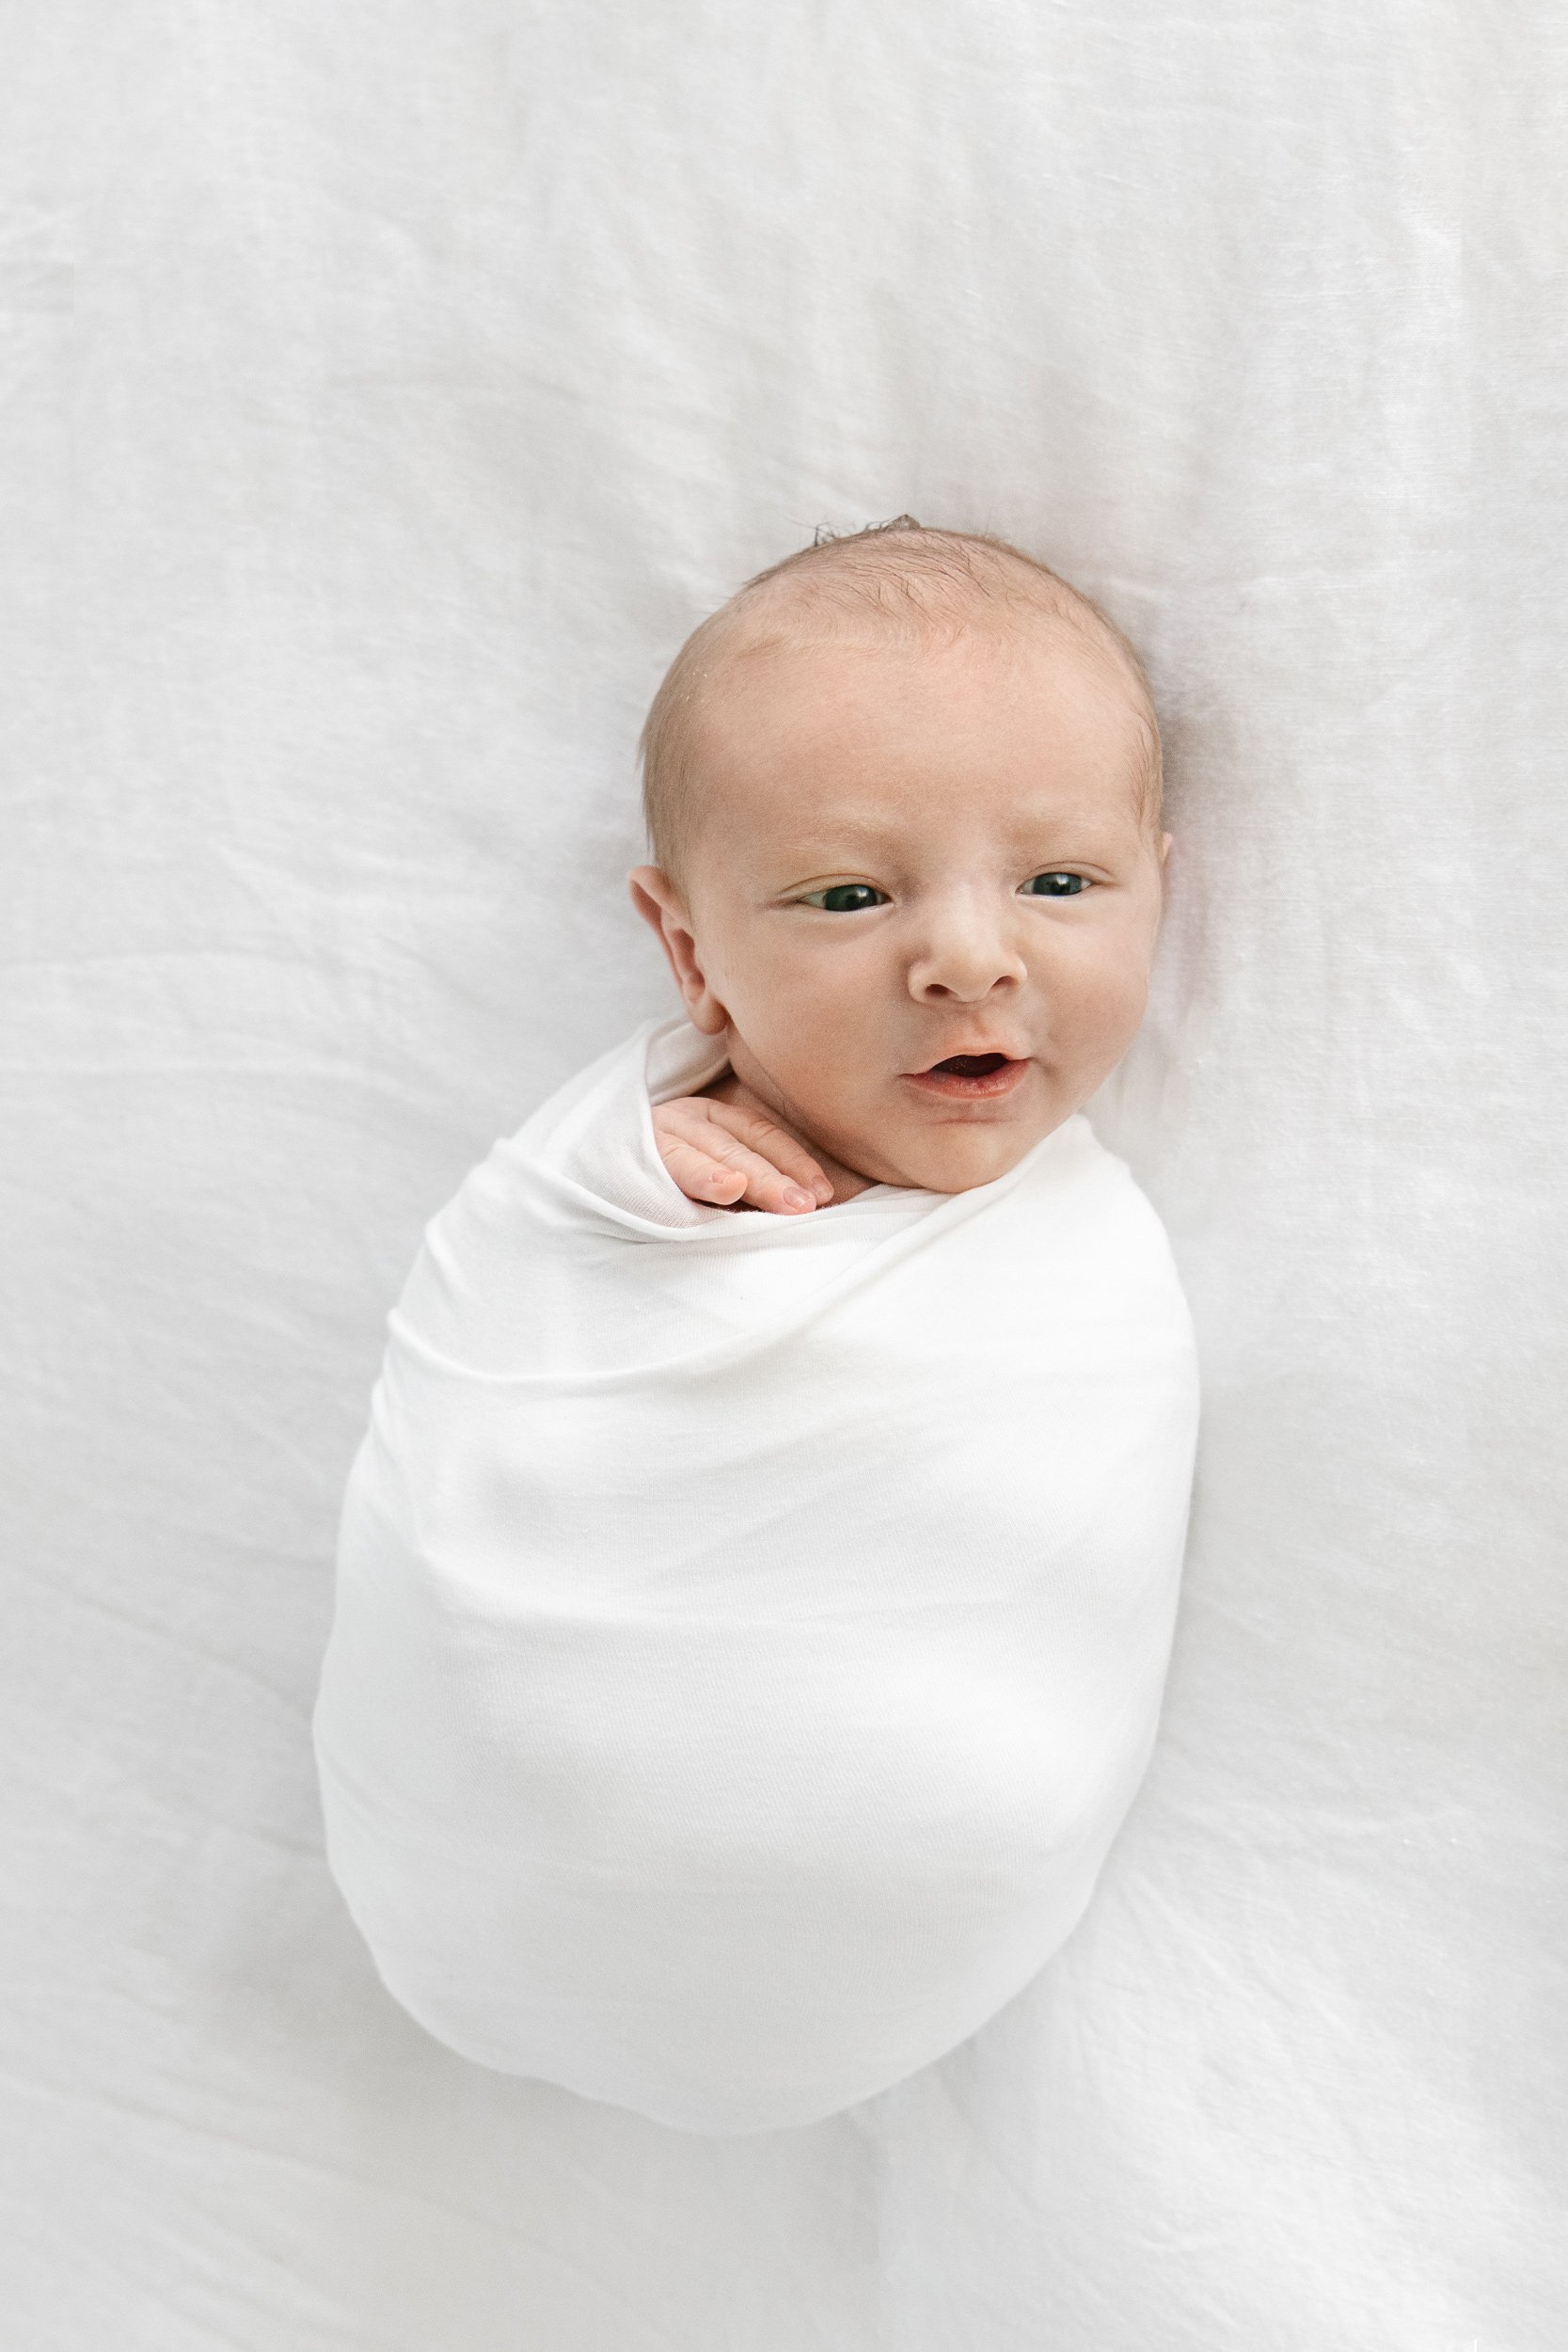  In-home Newborn portrait with a baby boy swaddled captured by Nicole Hawkins Photography in New Jersey. Montclair Newborns #NicoleHawkinsPhotography #InHomeNewborn #JerseyShoreNewborns #MontclairPhotographers #NewbornPhotography #baby #newborn 